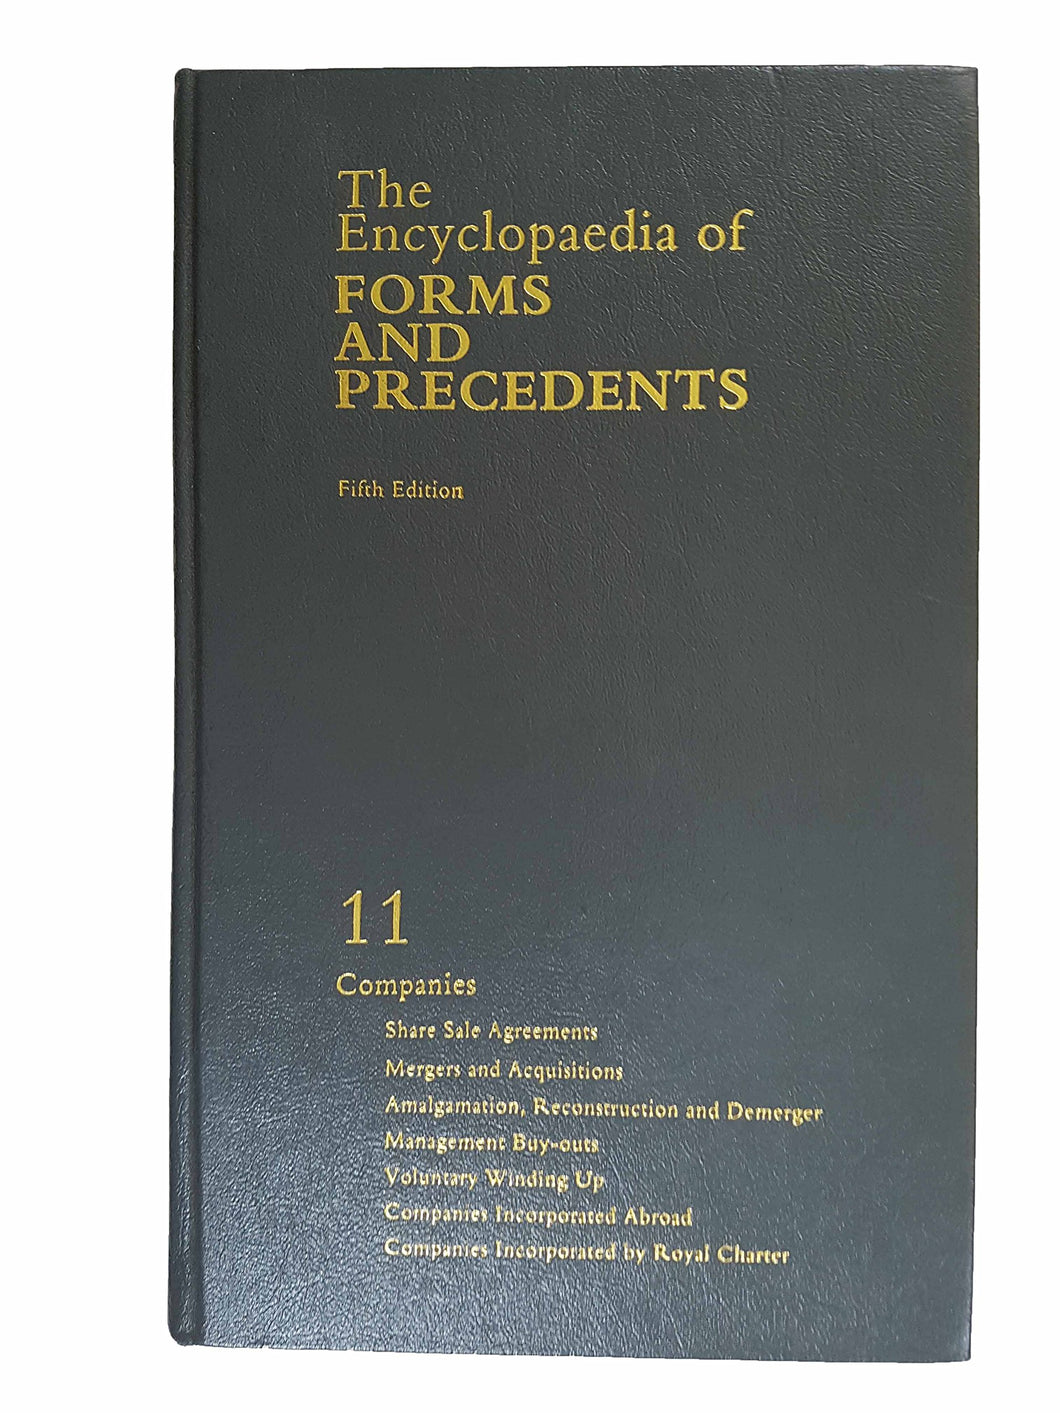 THE ENCYCLOPEDIA OF FORMS AND PRECENDENTS, VOLUME 11: COMPANIES